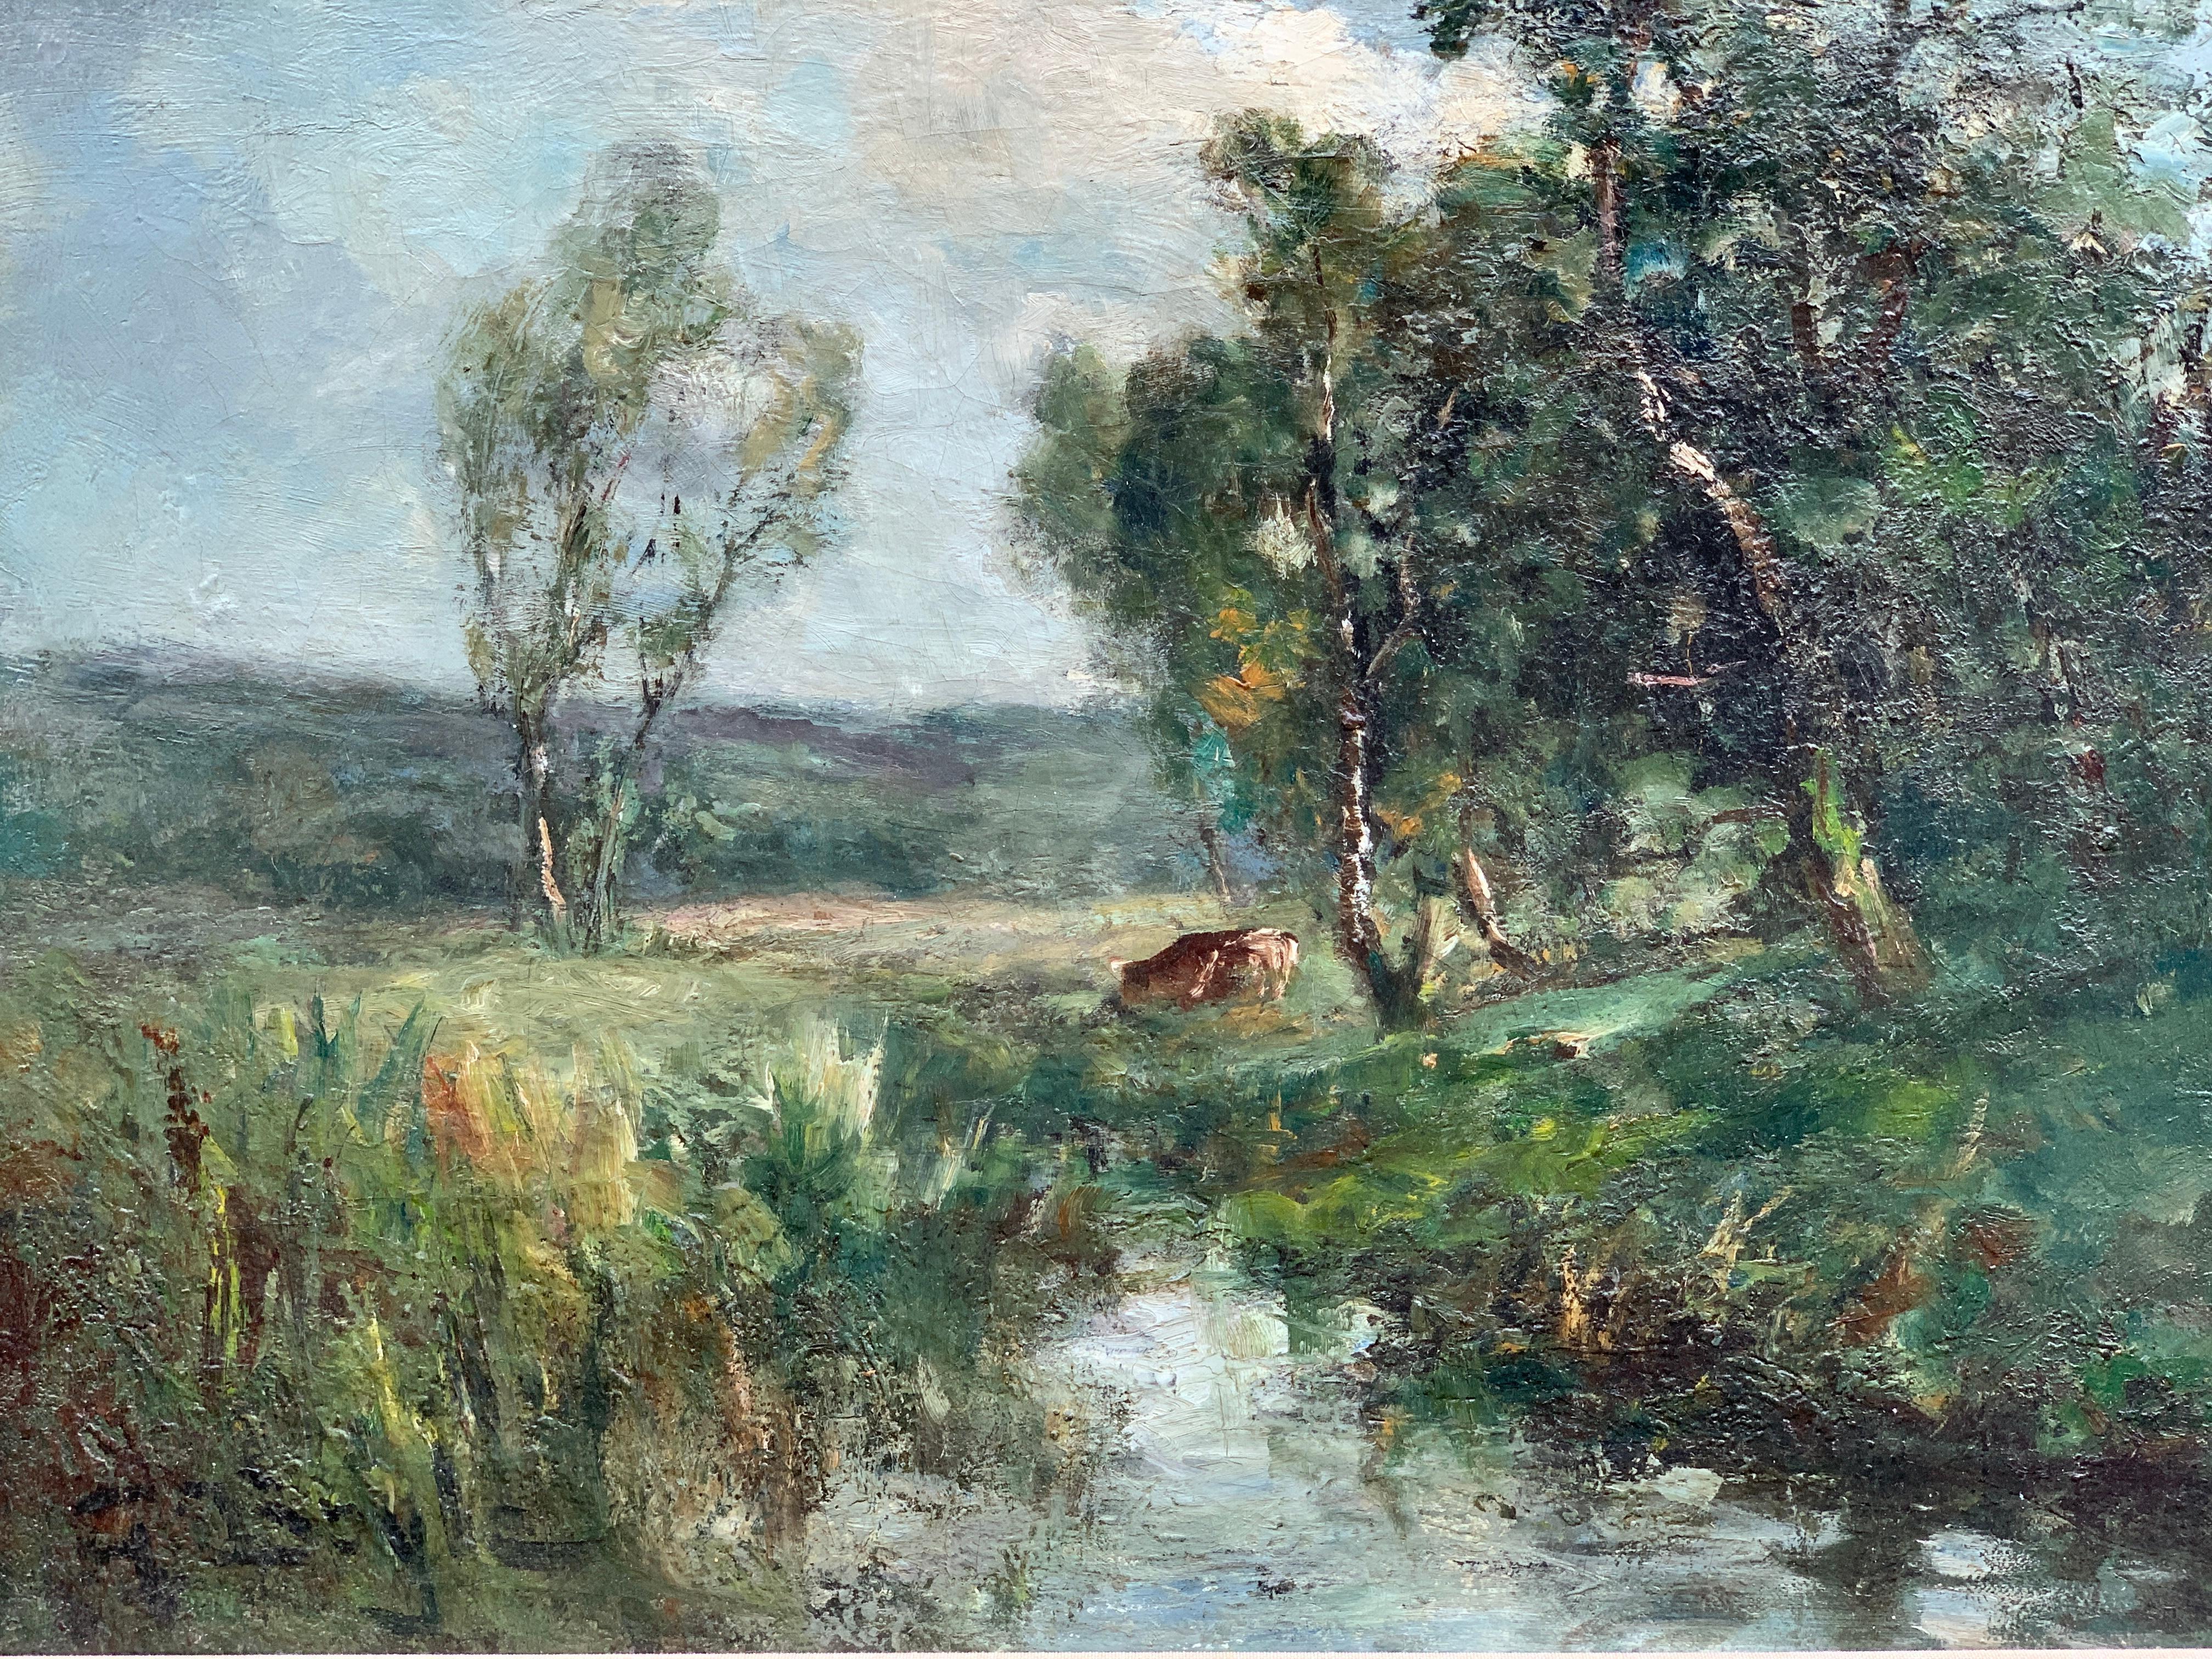 19th century English impressionist scene of the Barbizon forest - Painting by George Boyle